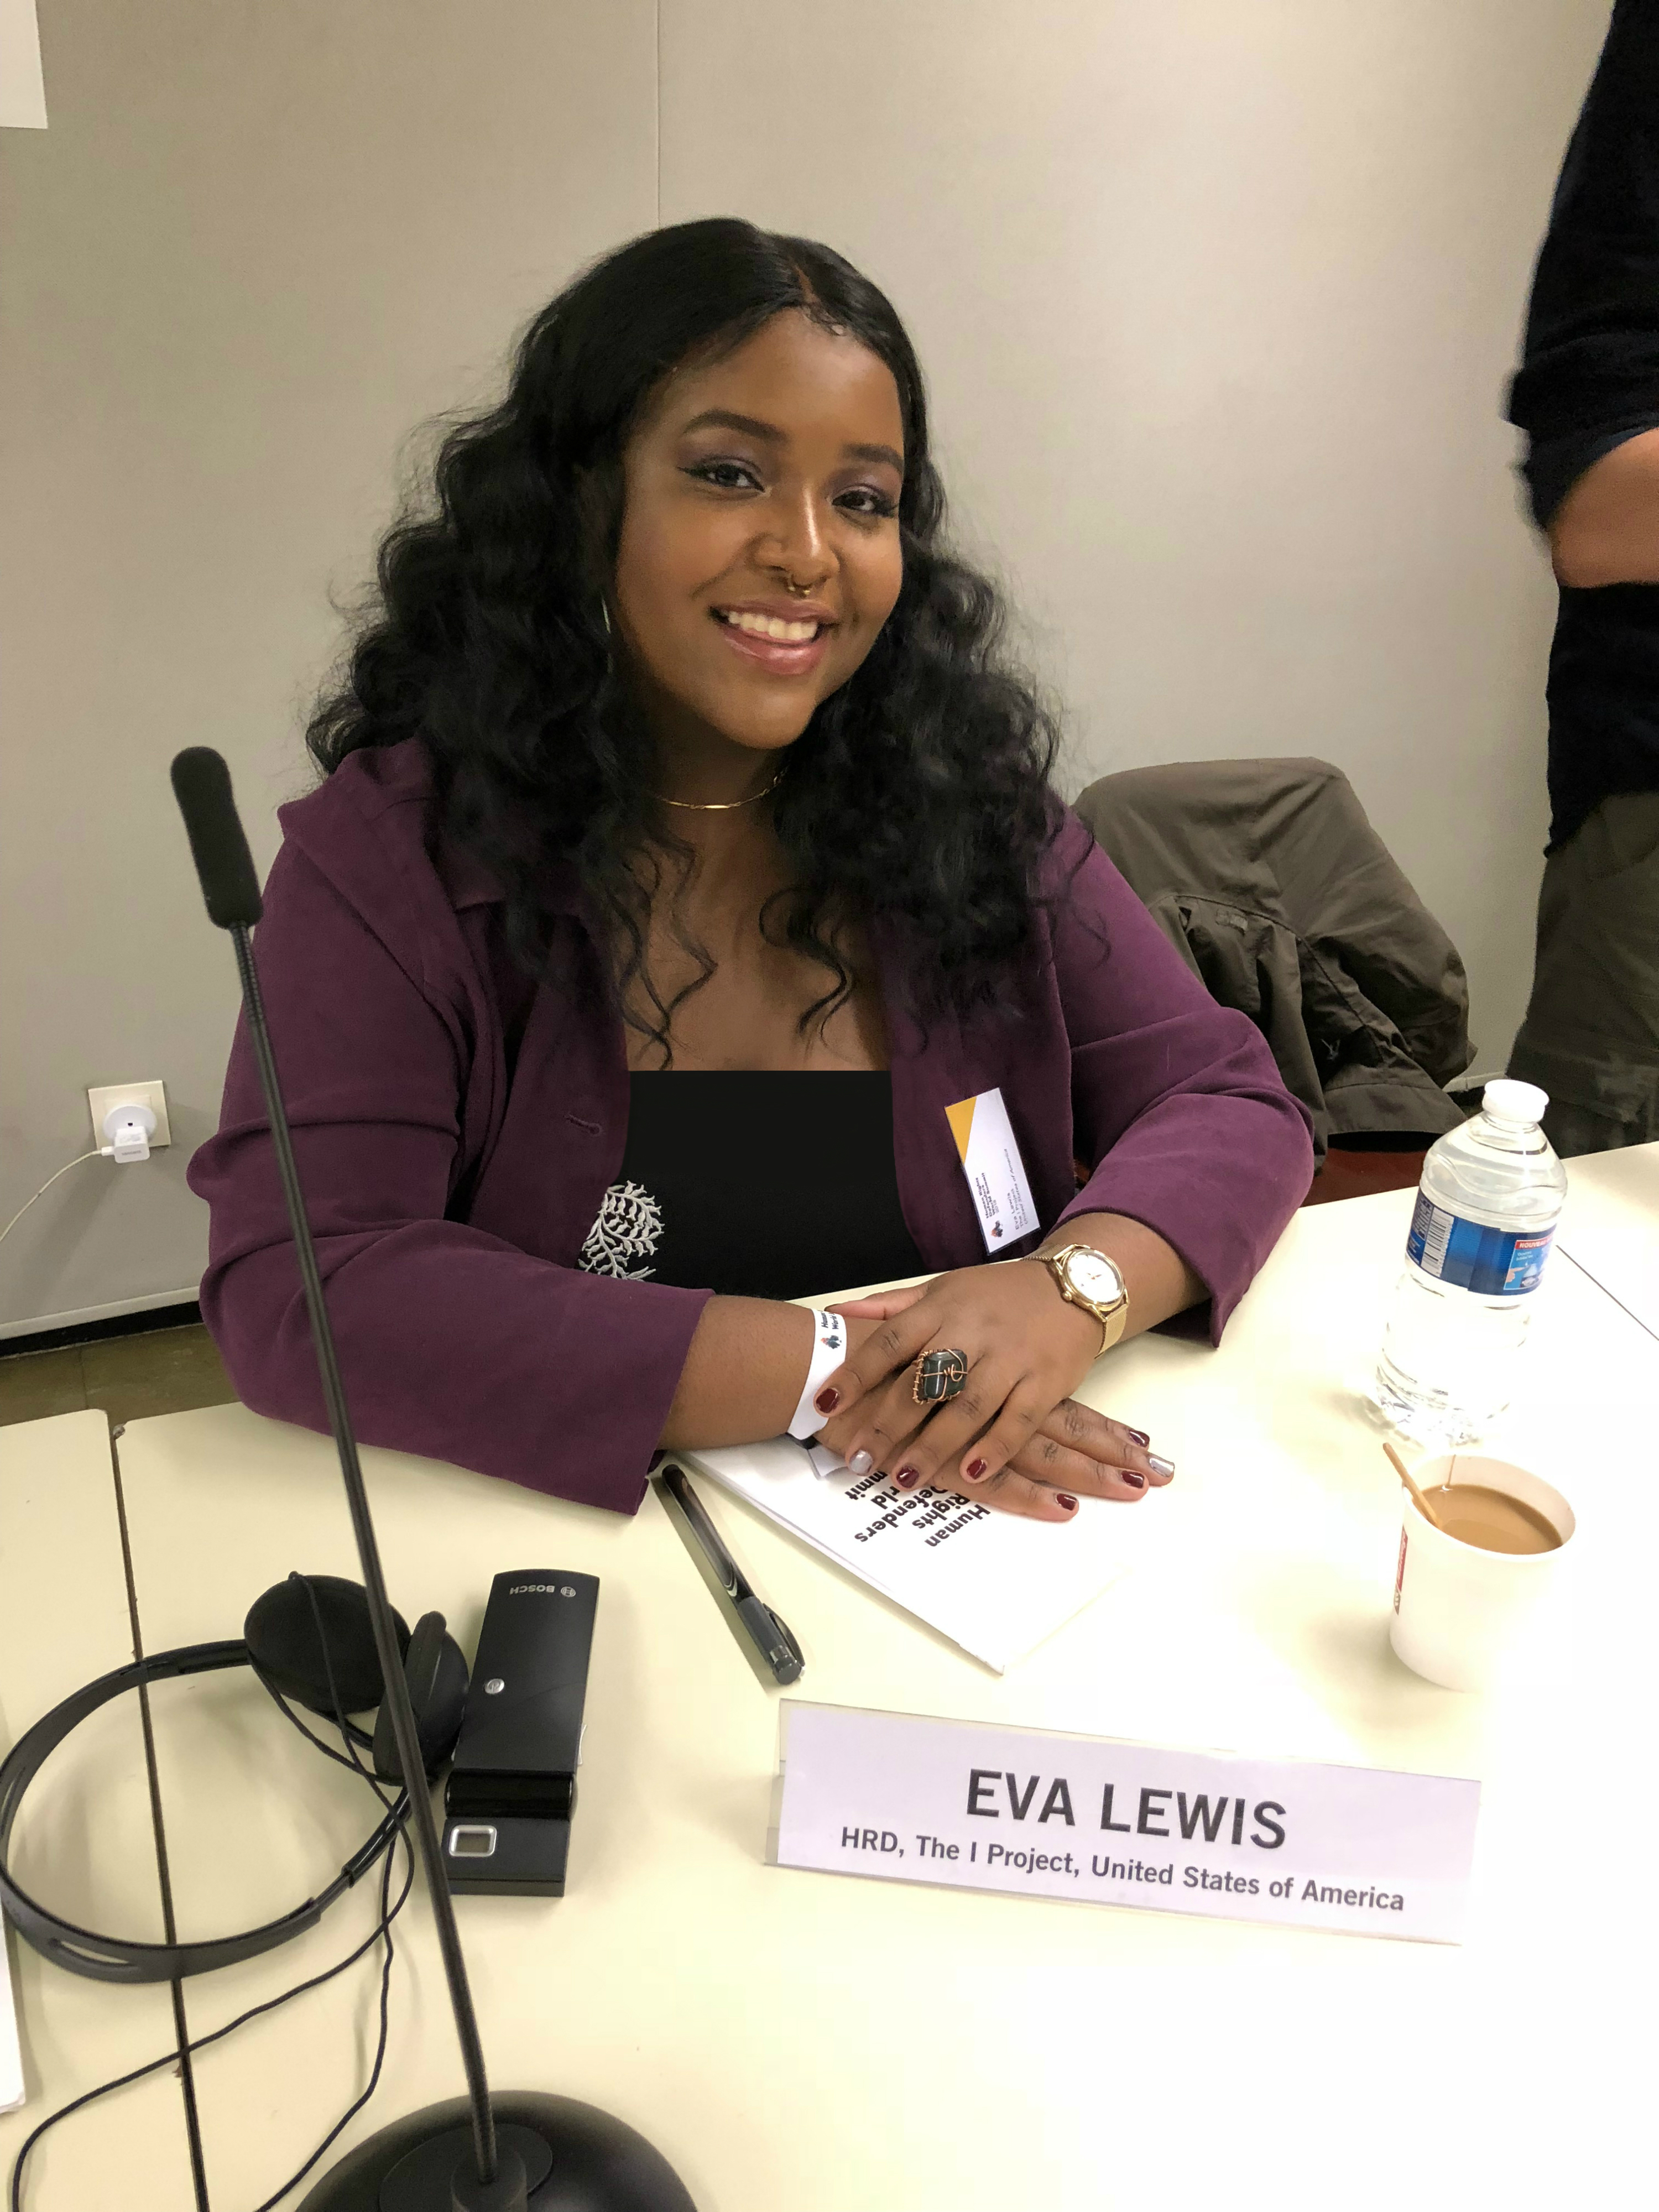 Eva Maria Lewis at a table at the Human Rights Summit in Paris 2018